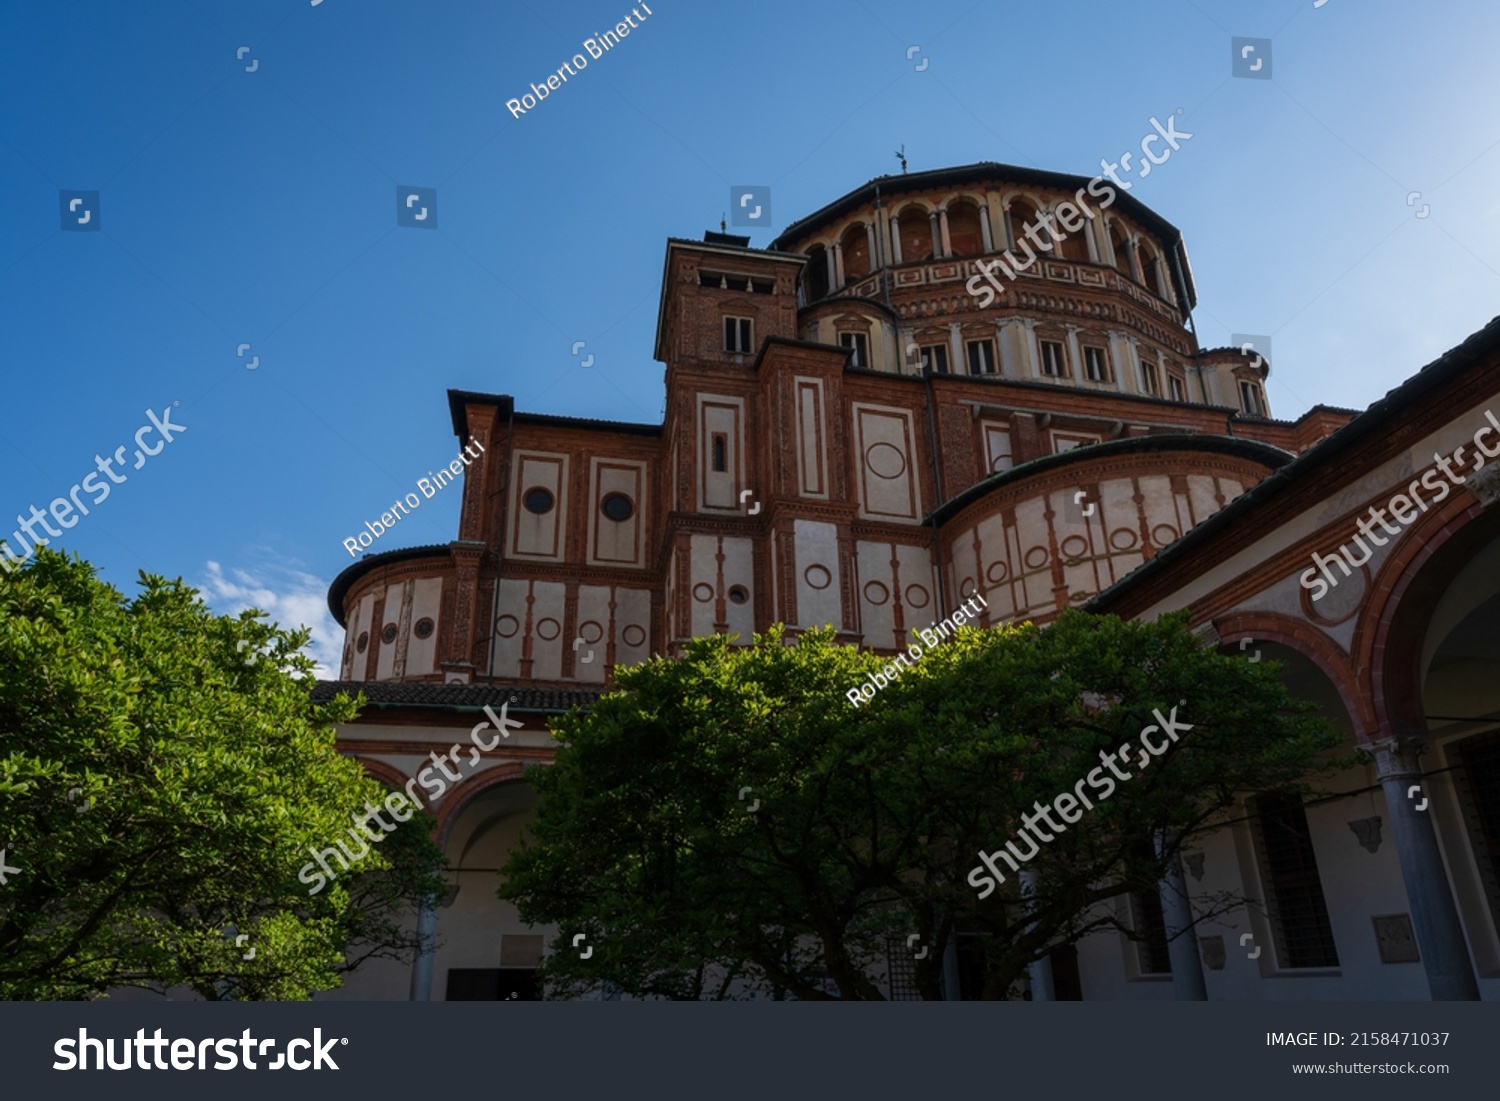 Church of Holy Mary of Grace (Chiesa di Santa Maria delle Grazie, 1497), This church is famous for hosting Leonardo da Vinci masterpiece "The Last Supper",Milan, Italy. #2158471037